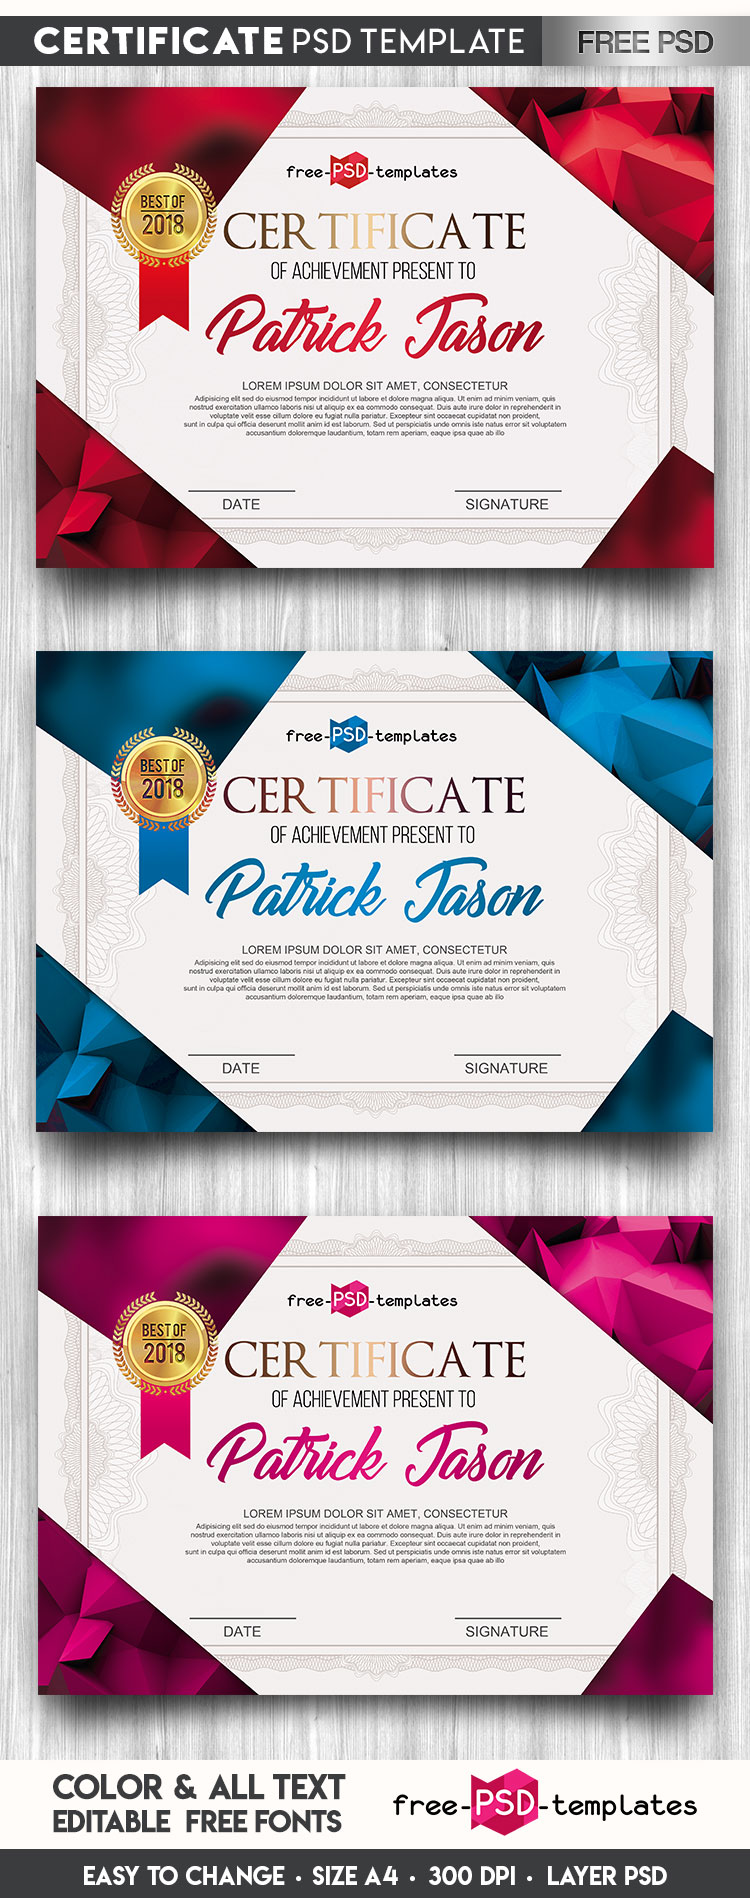 free-psd-certificate-templates-download-printable-templates